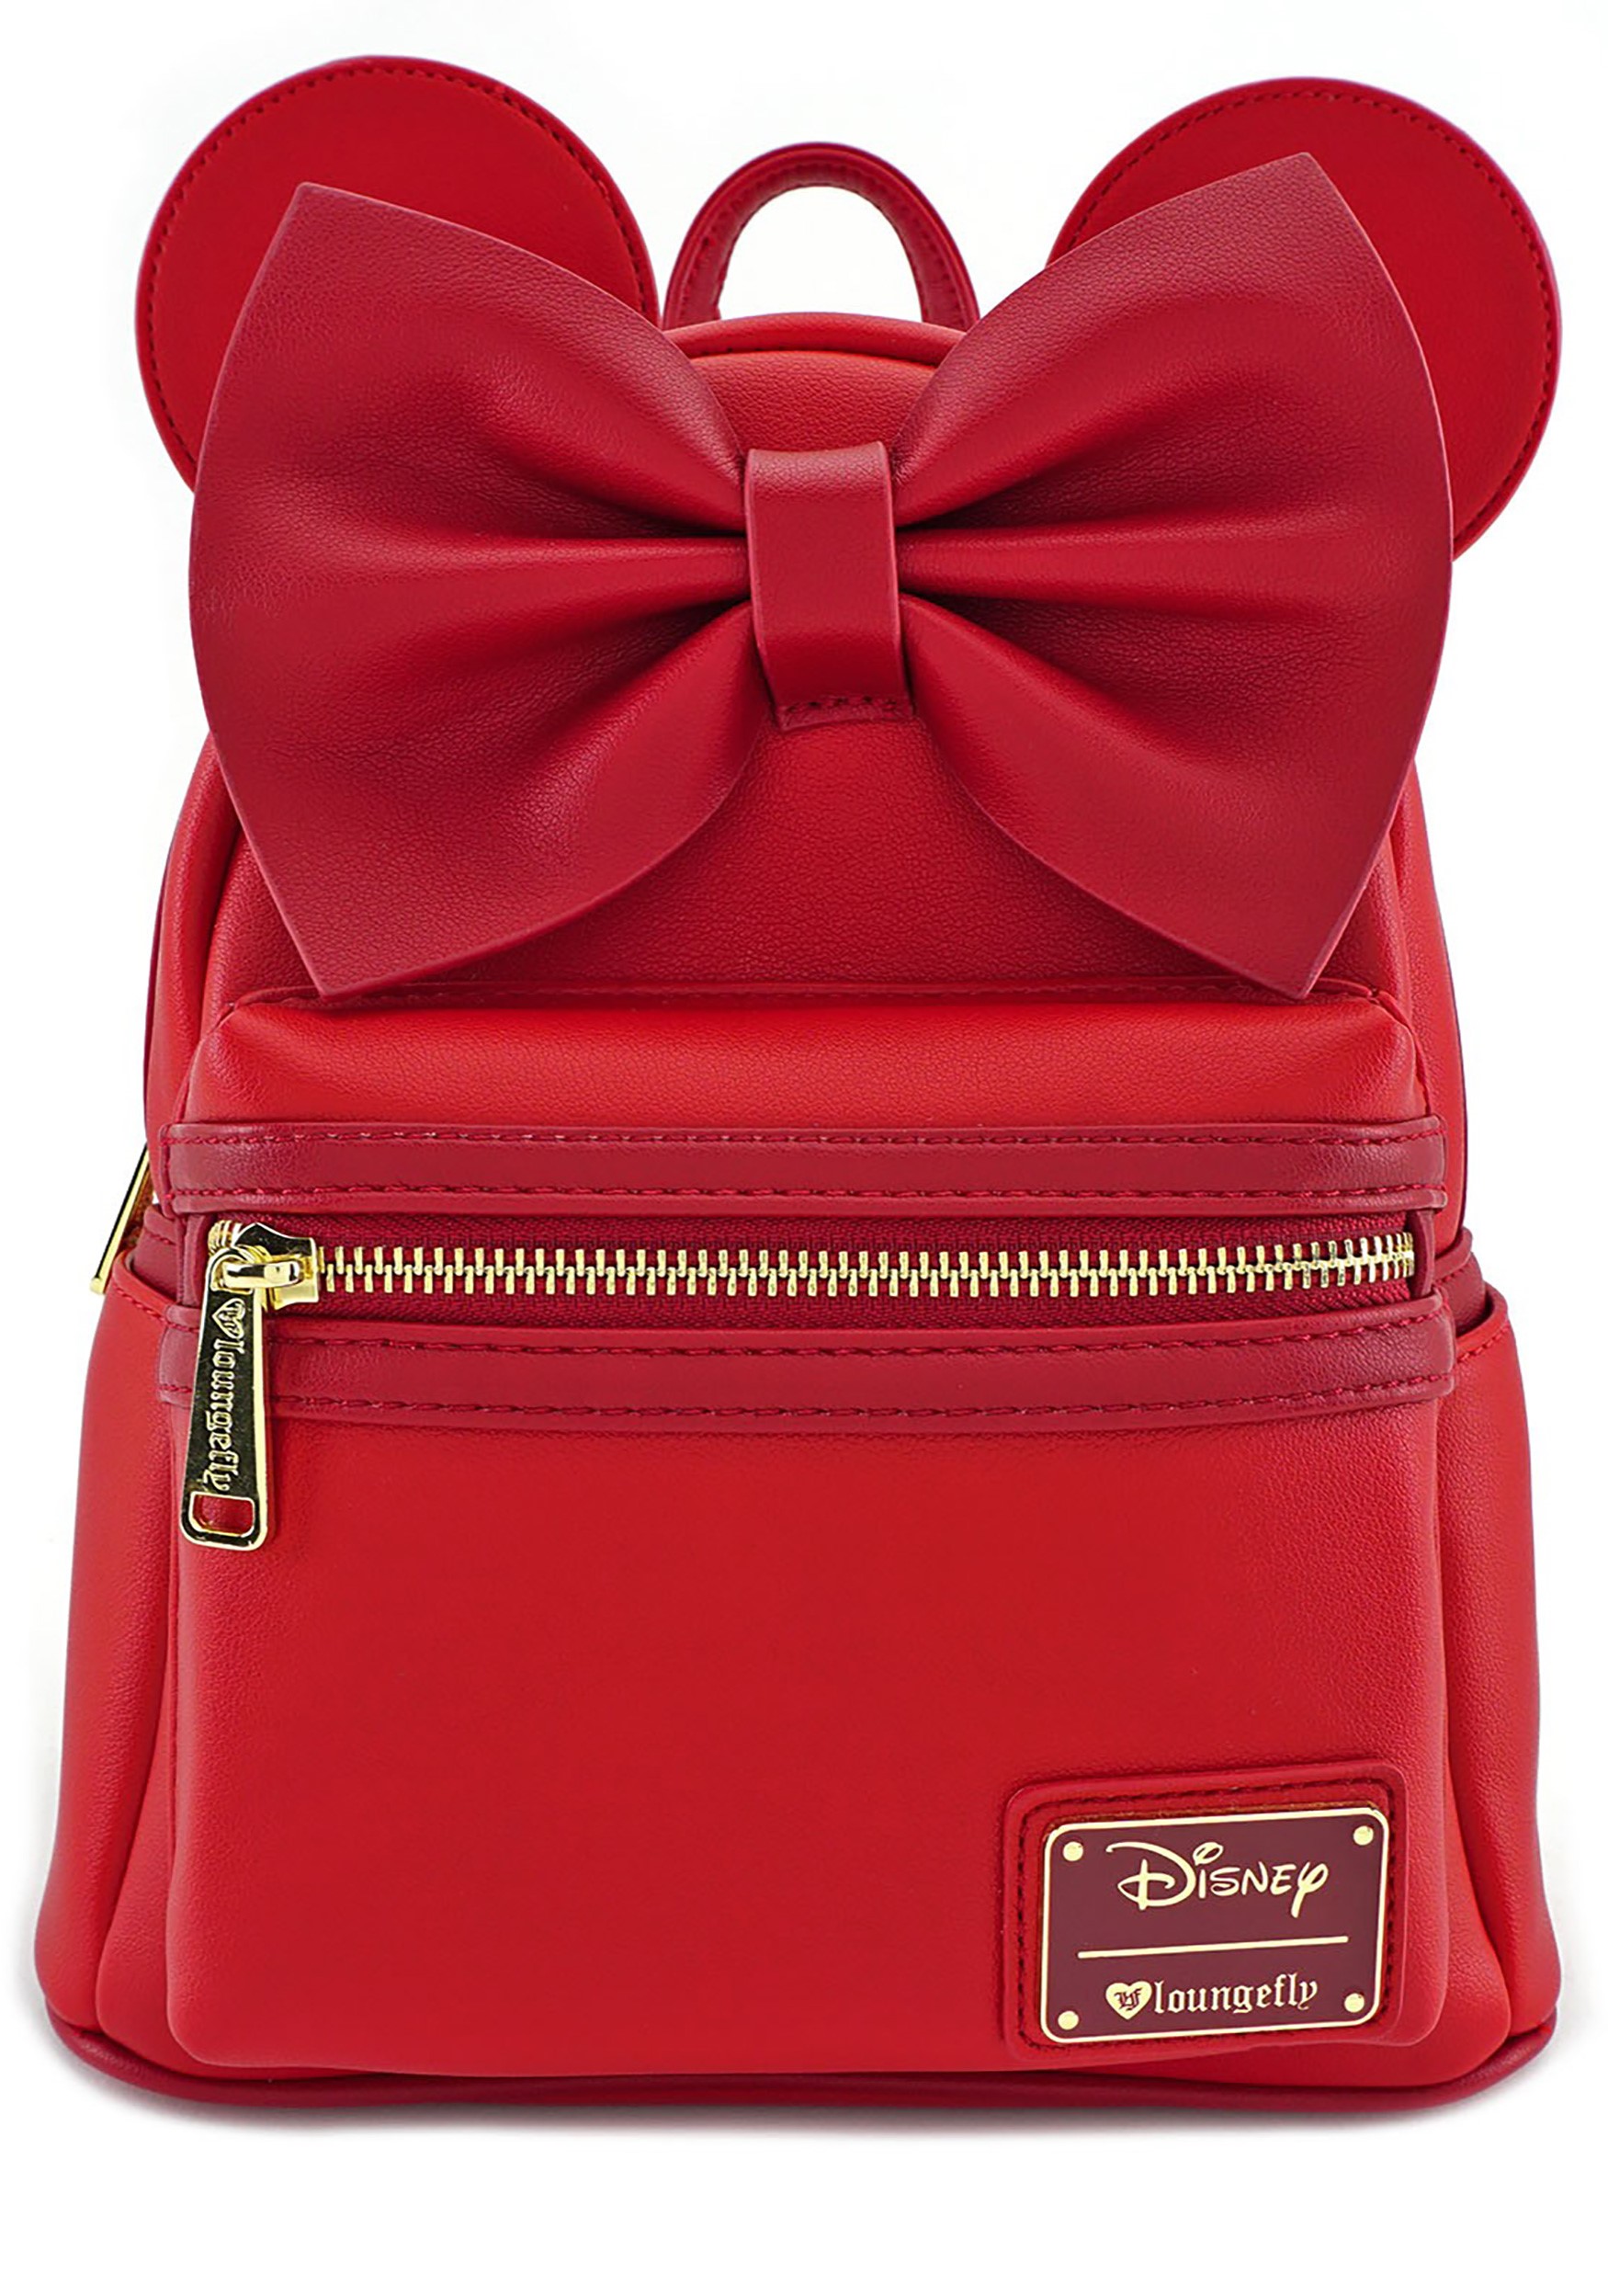 Loungefly Disney Minnie Mouse Mini Backpack Iucn Water